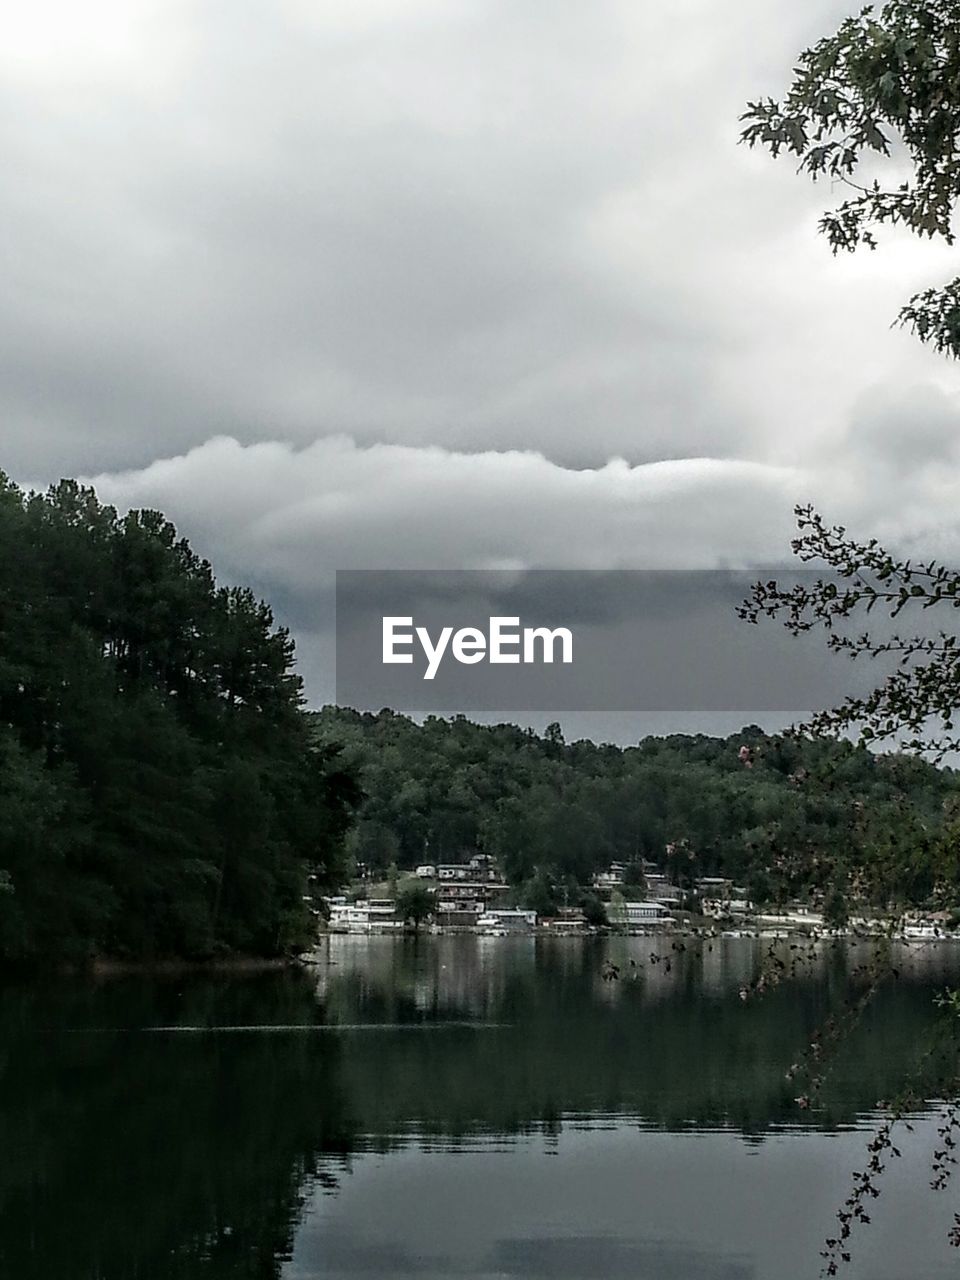 SCENIC VIEW OF LAKE AGAINST CLOUDY SKY